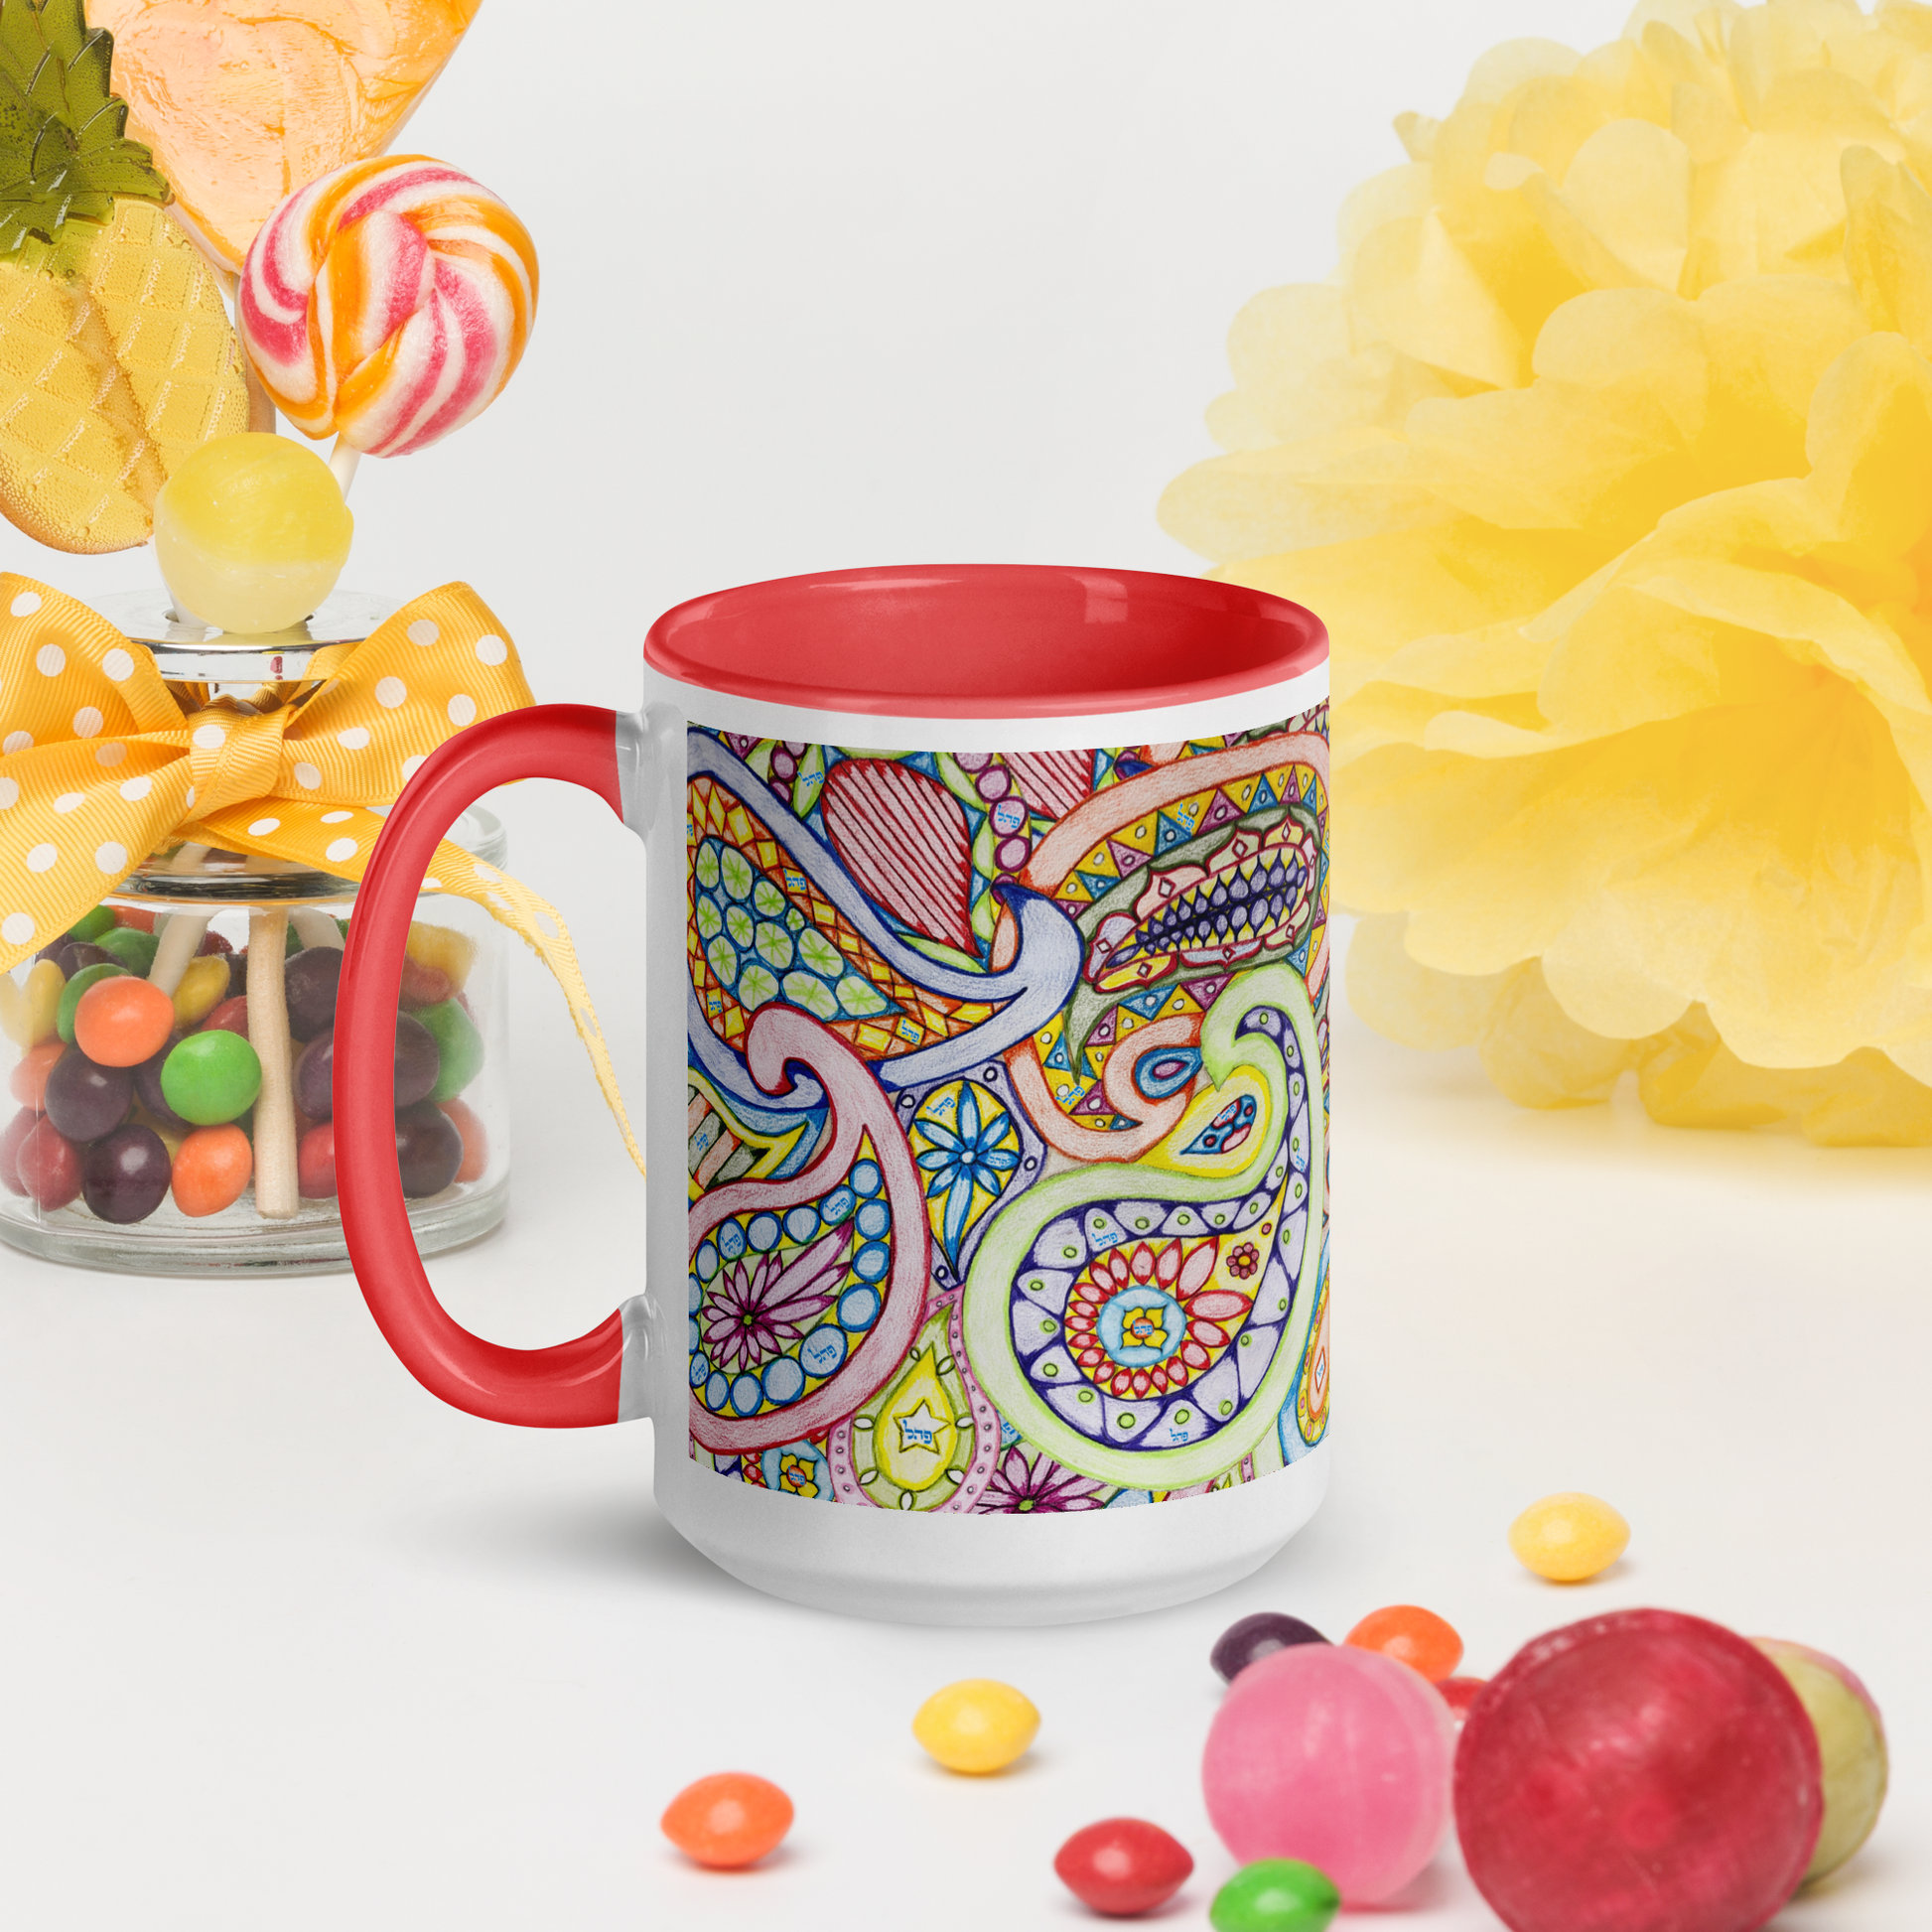  Mug-with-Color-Inside-15oz-Red-Remove-Addictions-(72-Names-of-God-Pey-Hey-Lamed)-6-137online.com